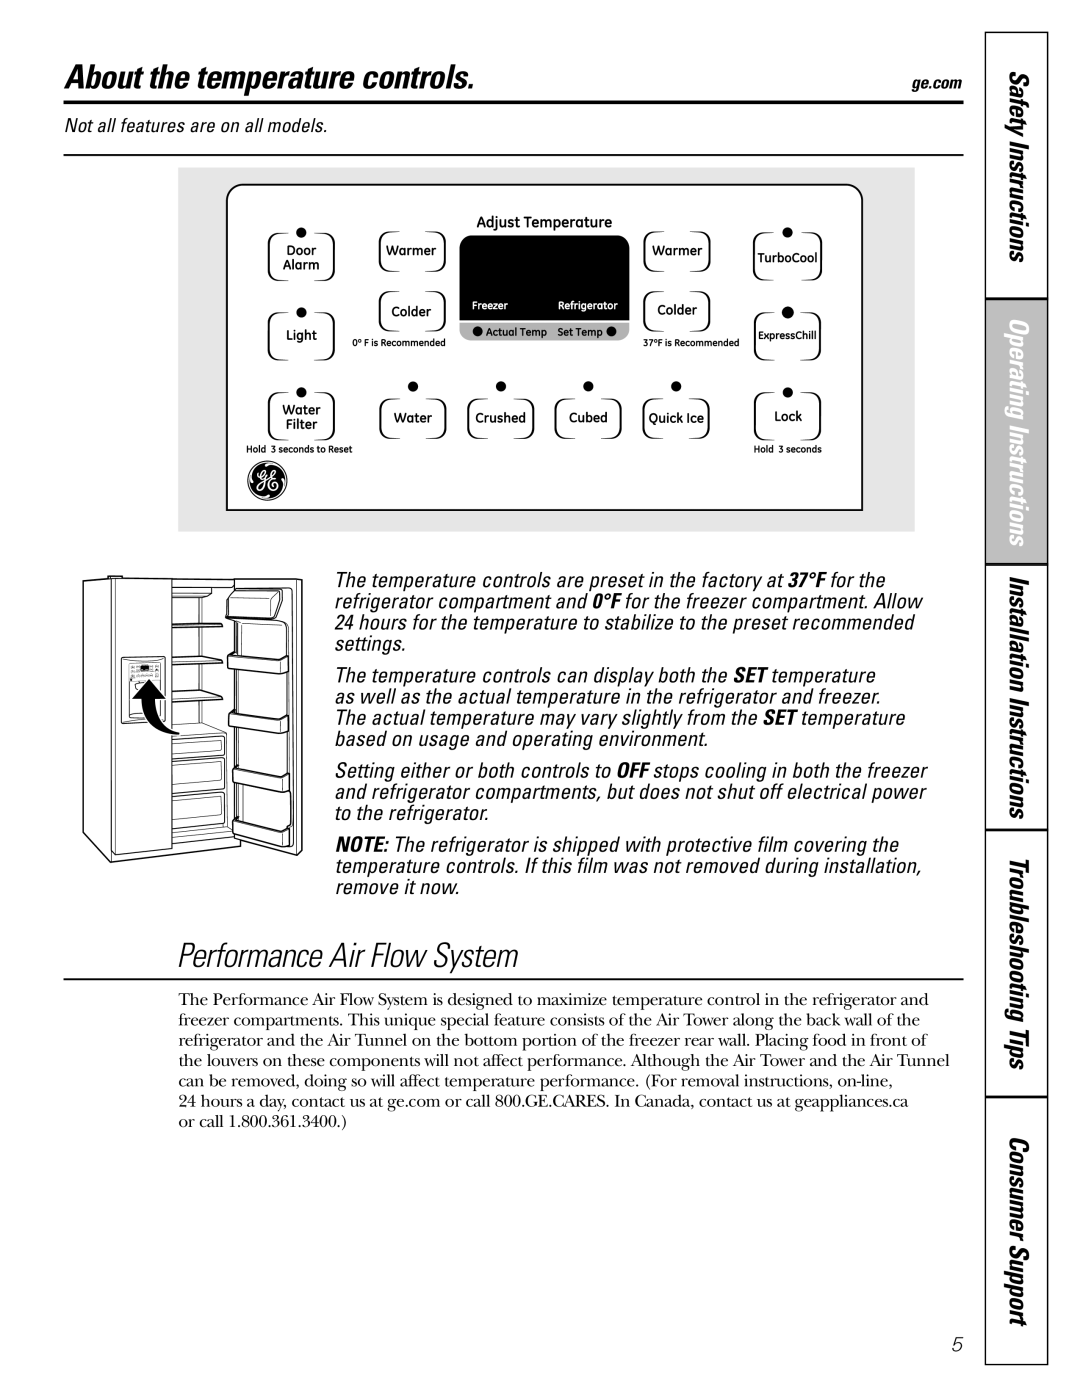 GE MODELS 23 AND 25 installation instructions About the temperature controls, Performance Air Flow System 